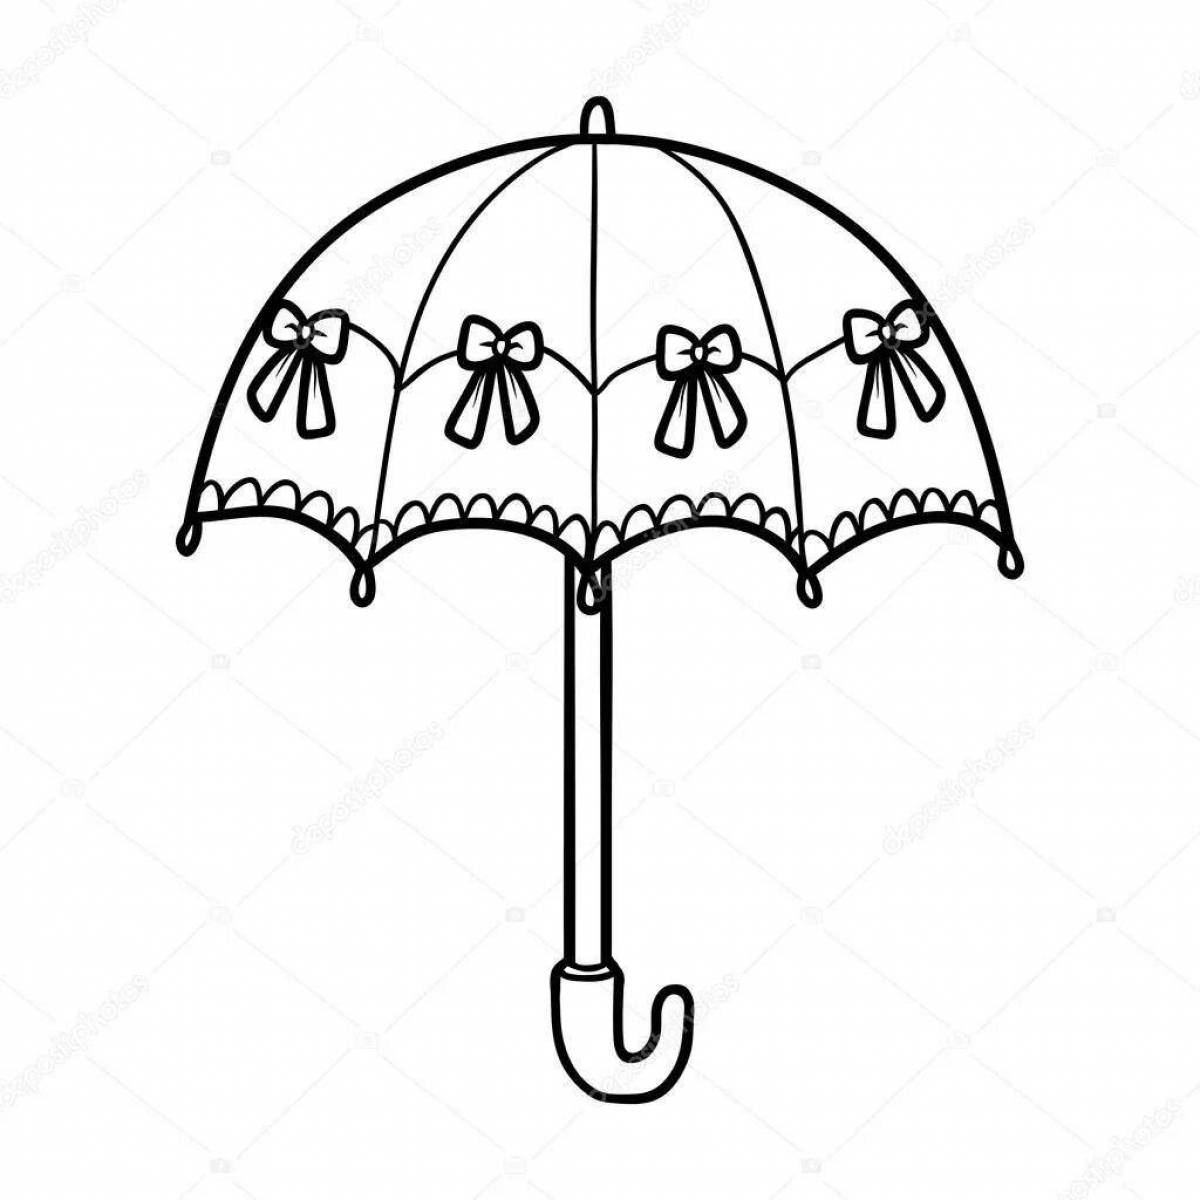 Multicolored umbrella coloring book for 4-5 year olds